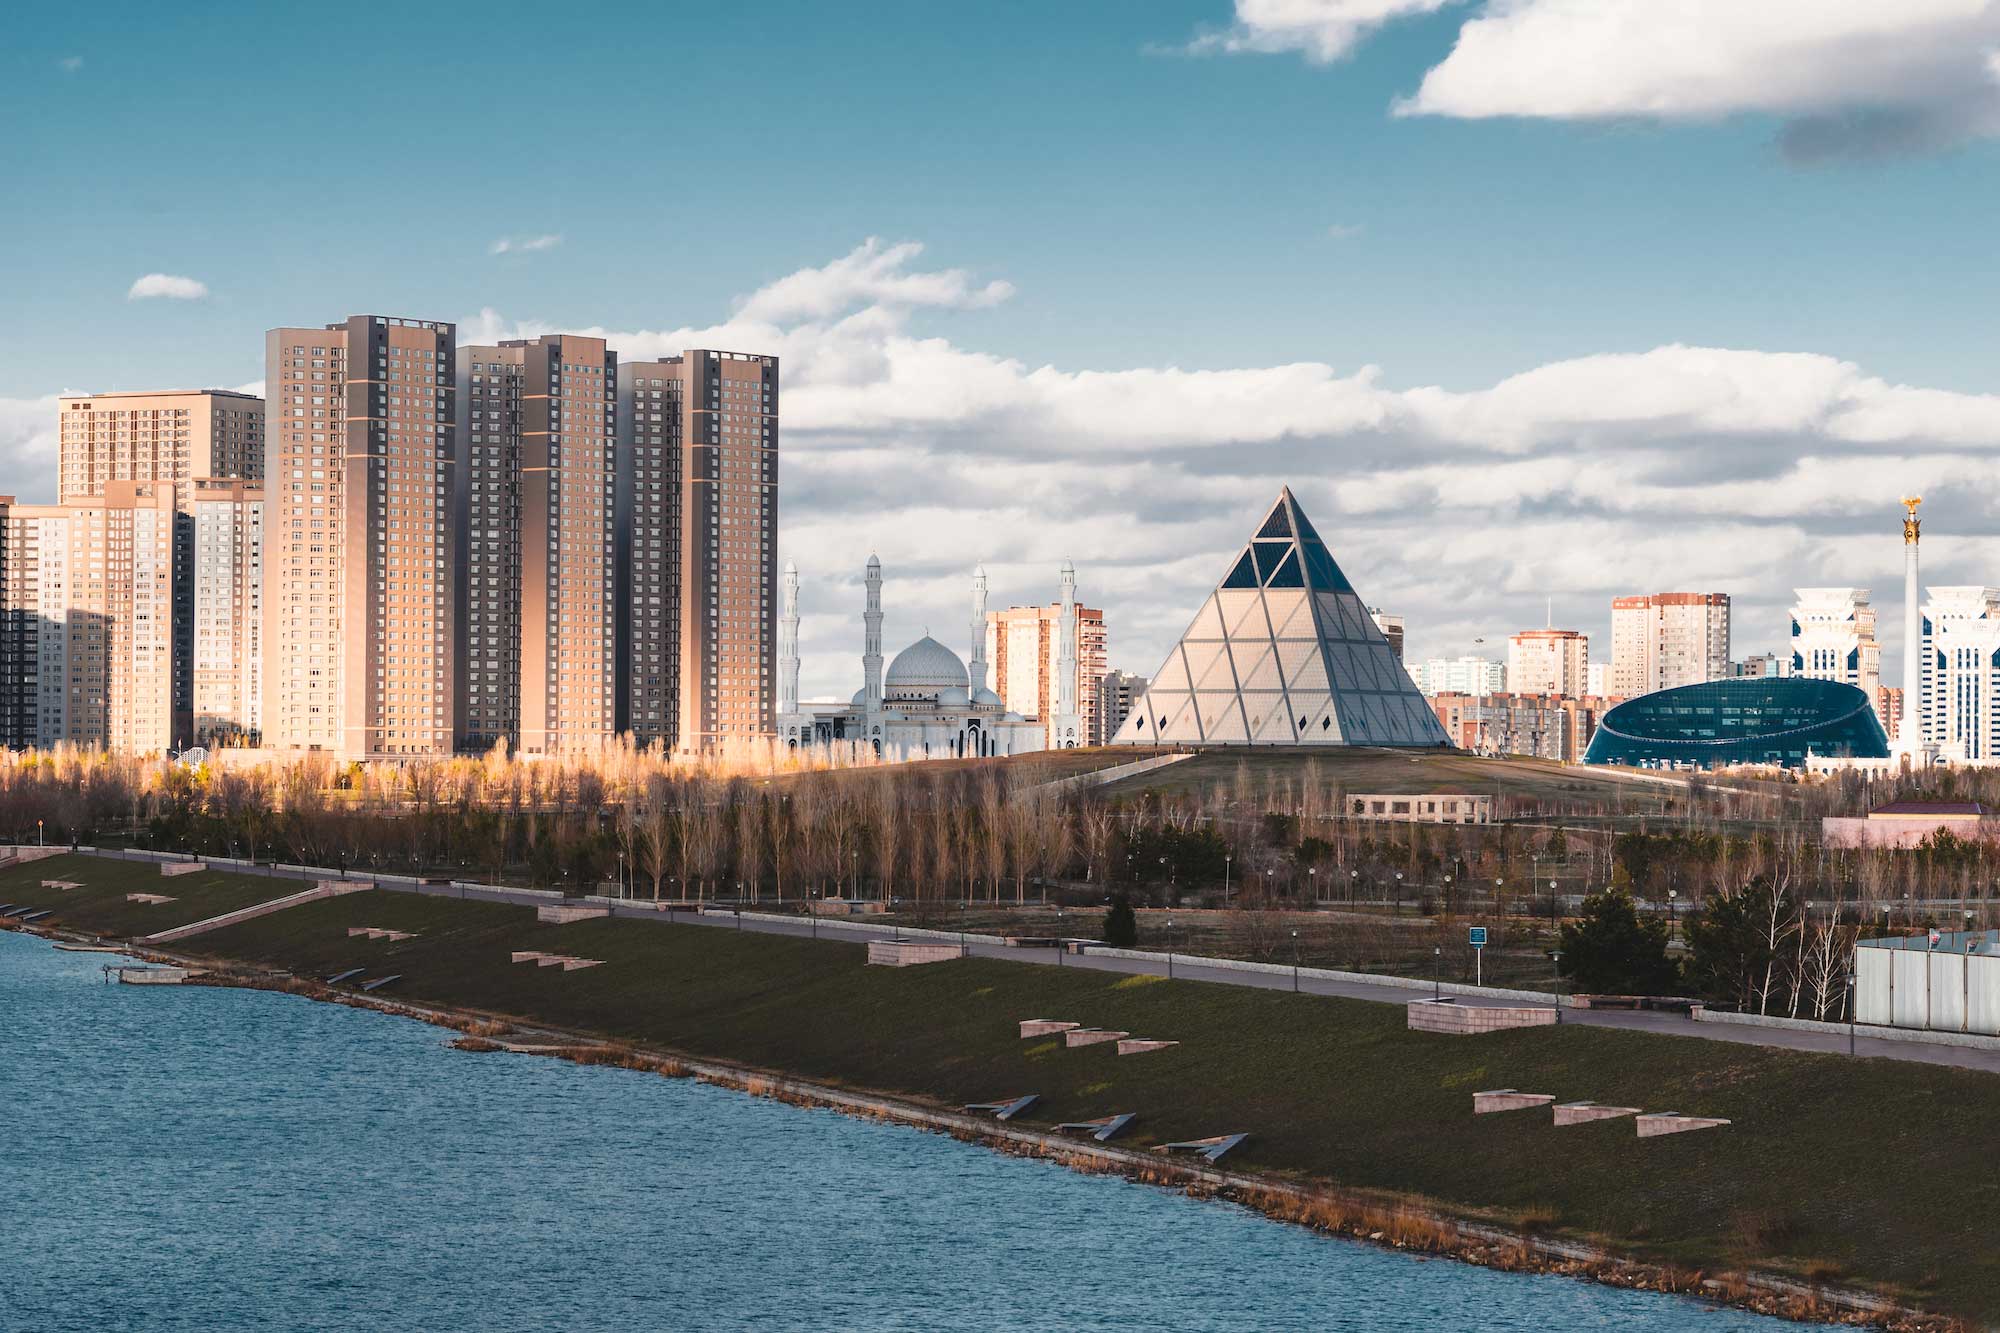 Palace of Peace and Reconciliation in Nur-Sultan, Kazakhstan. Image: Shutterstock/Mathias Berlin